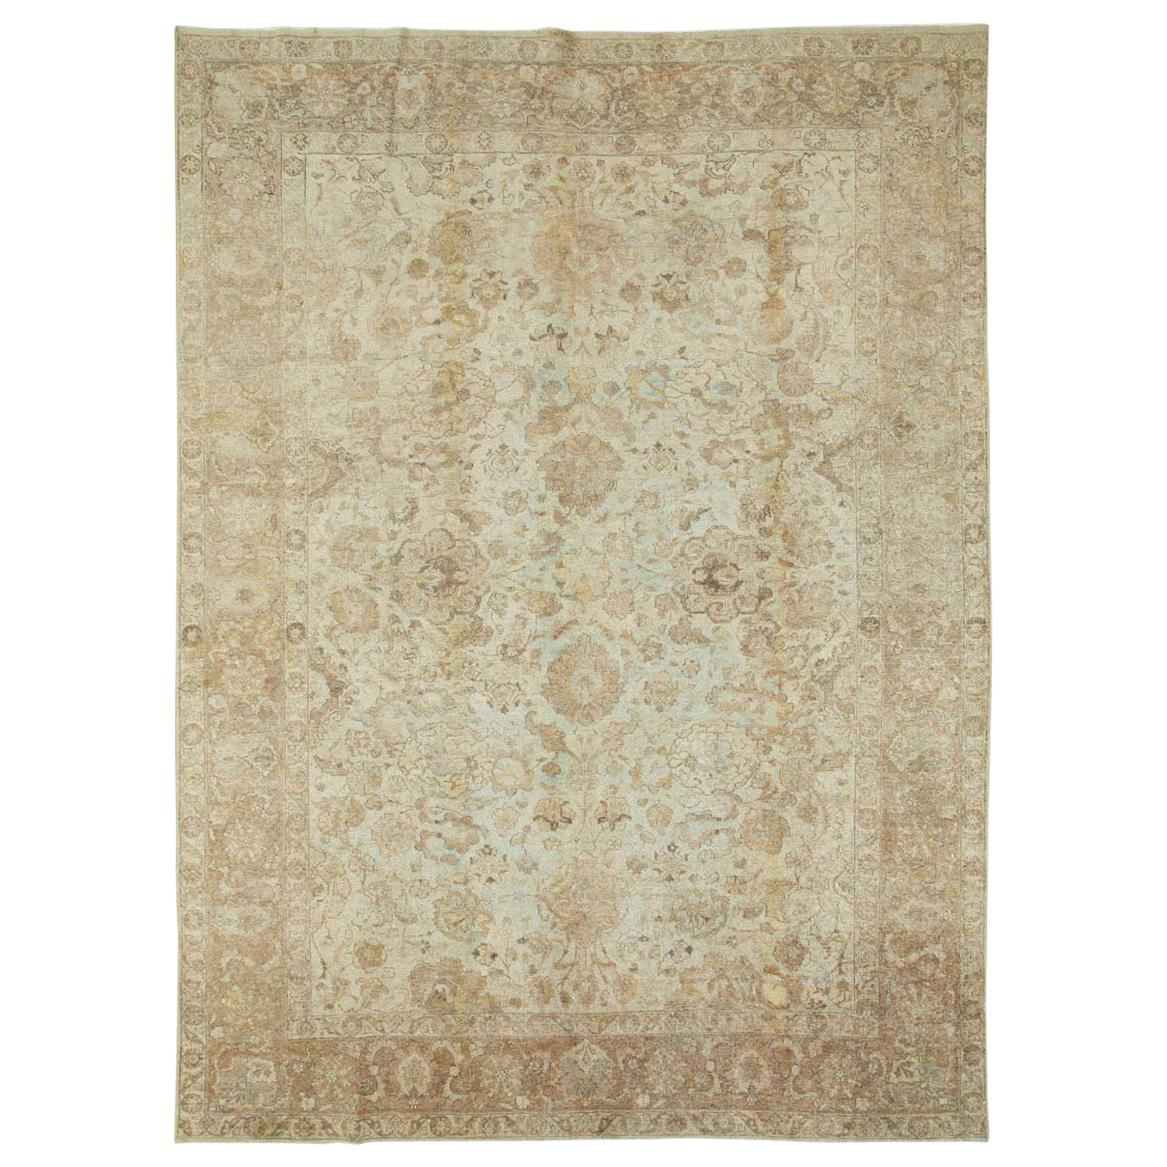 Early 20th Century Handmade Persian Tabriz Accent Rug with Muted Neutral Tones